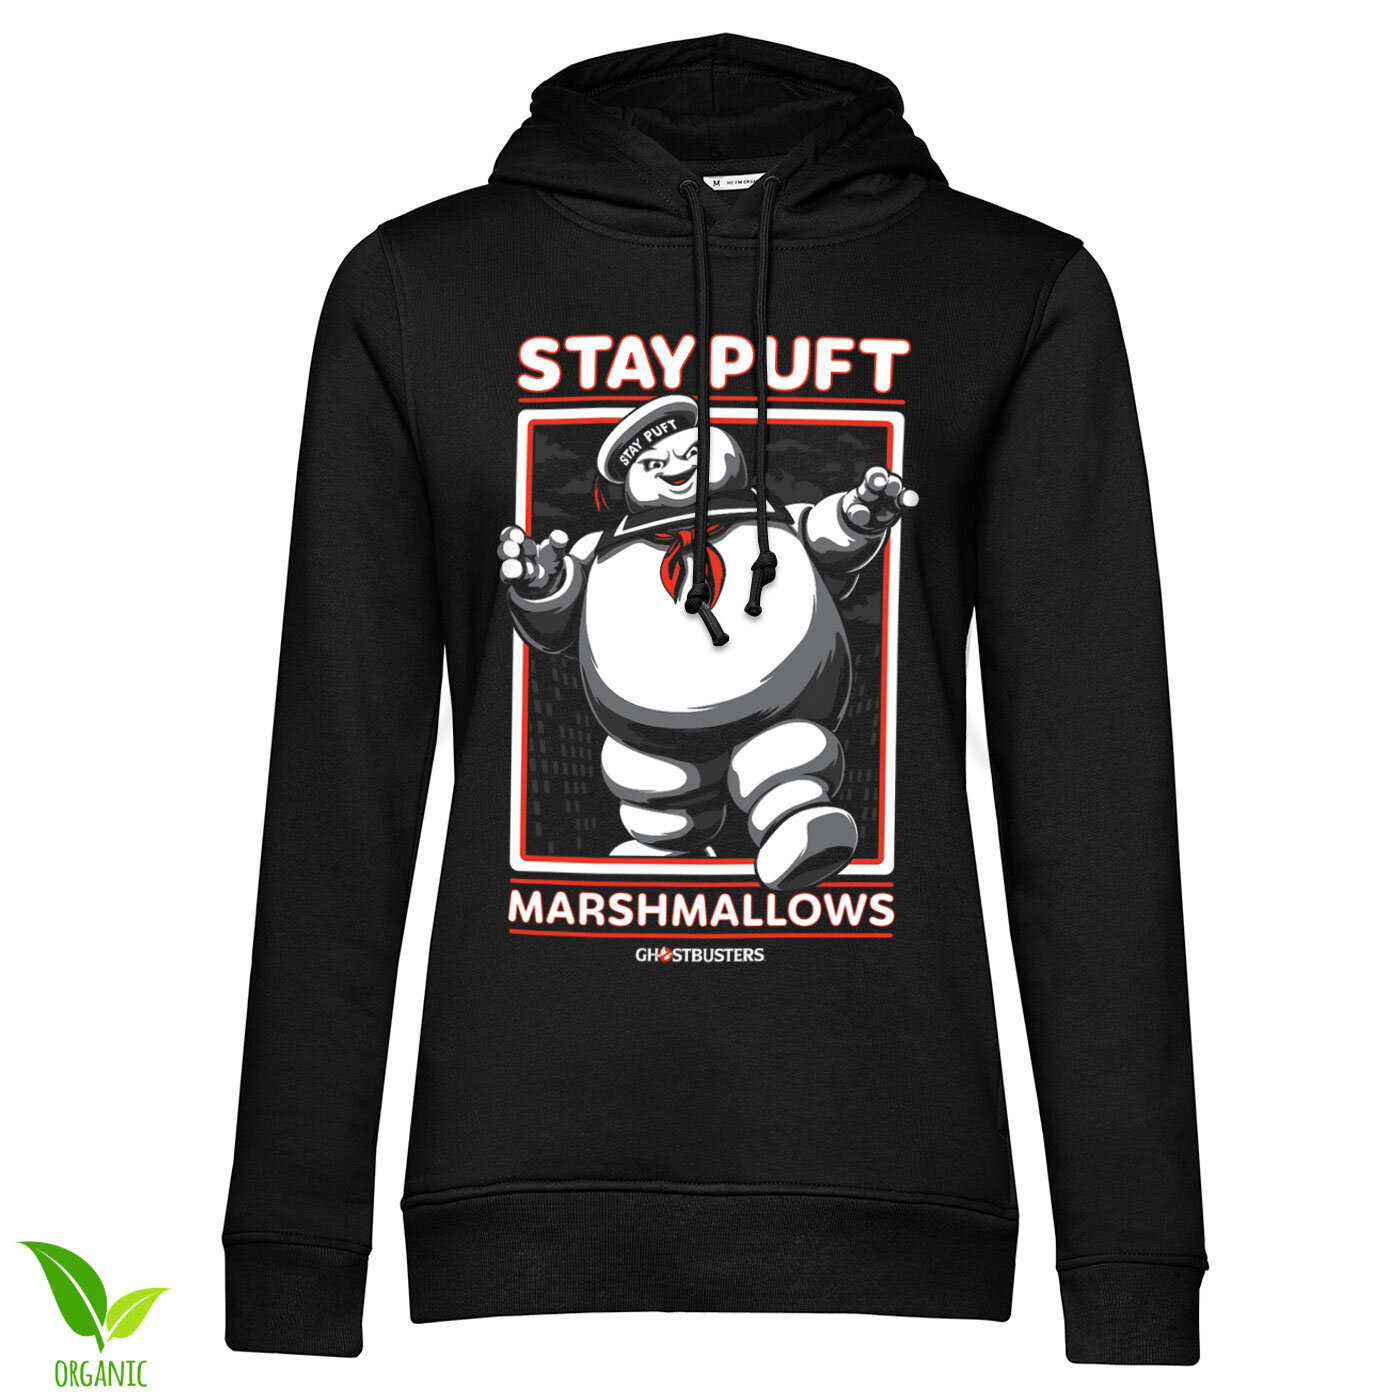 Stay Puft Marshmallows Girls Hoodie